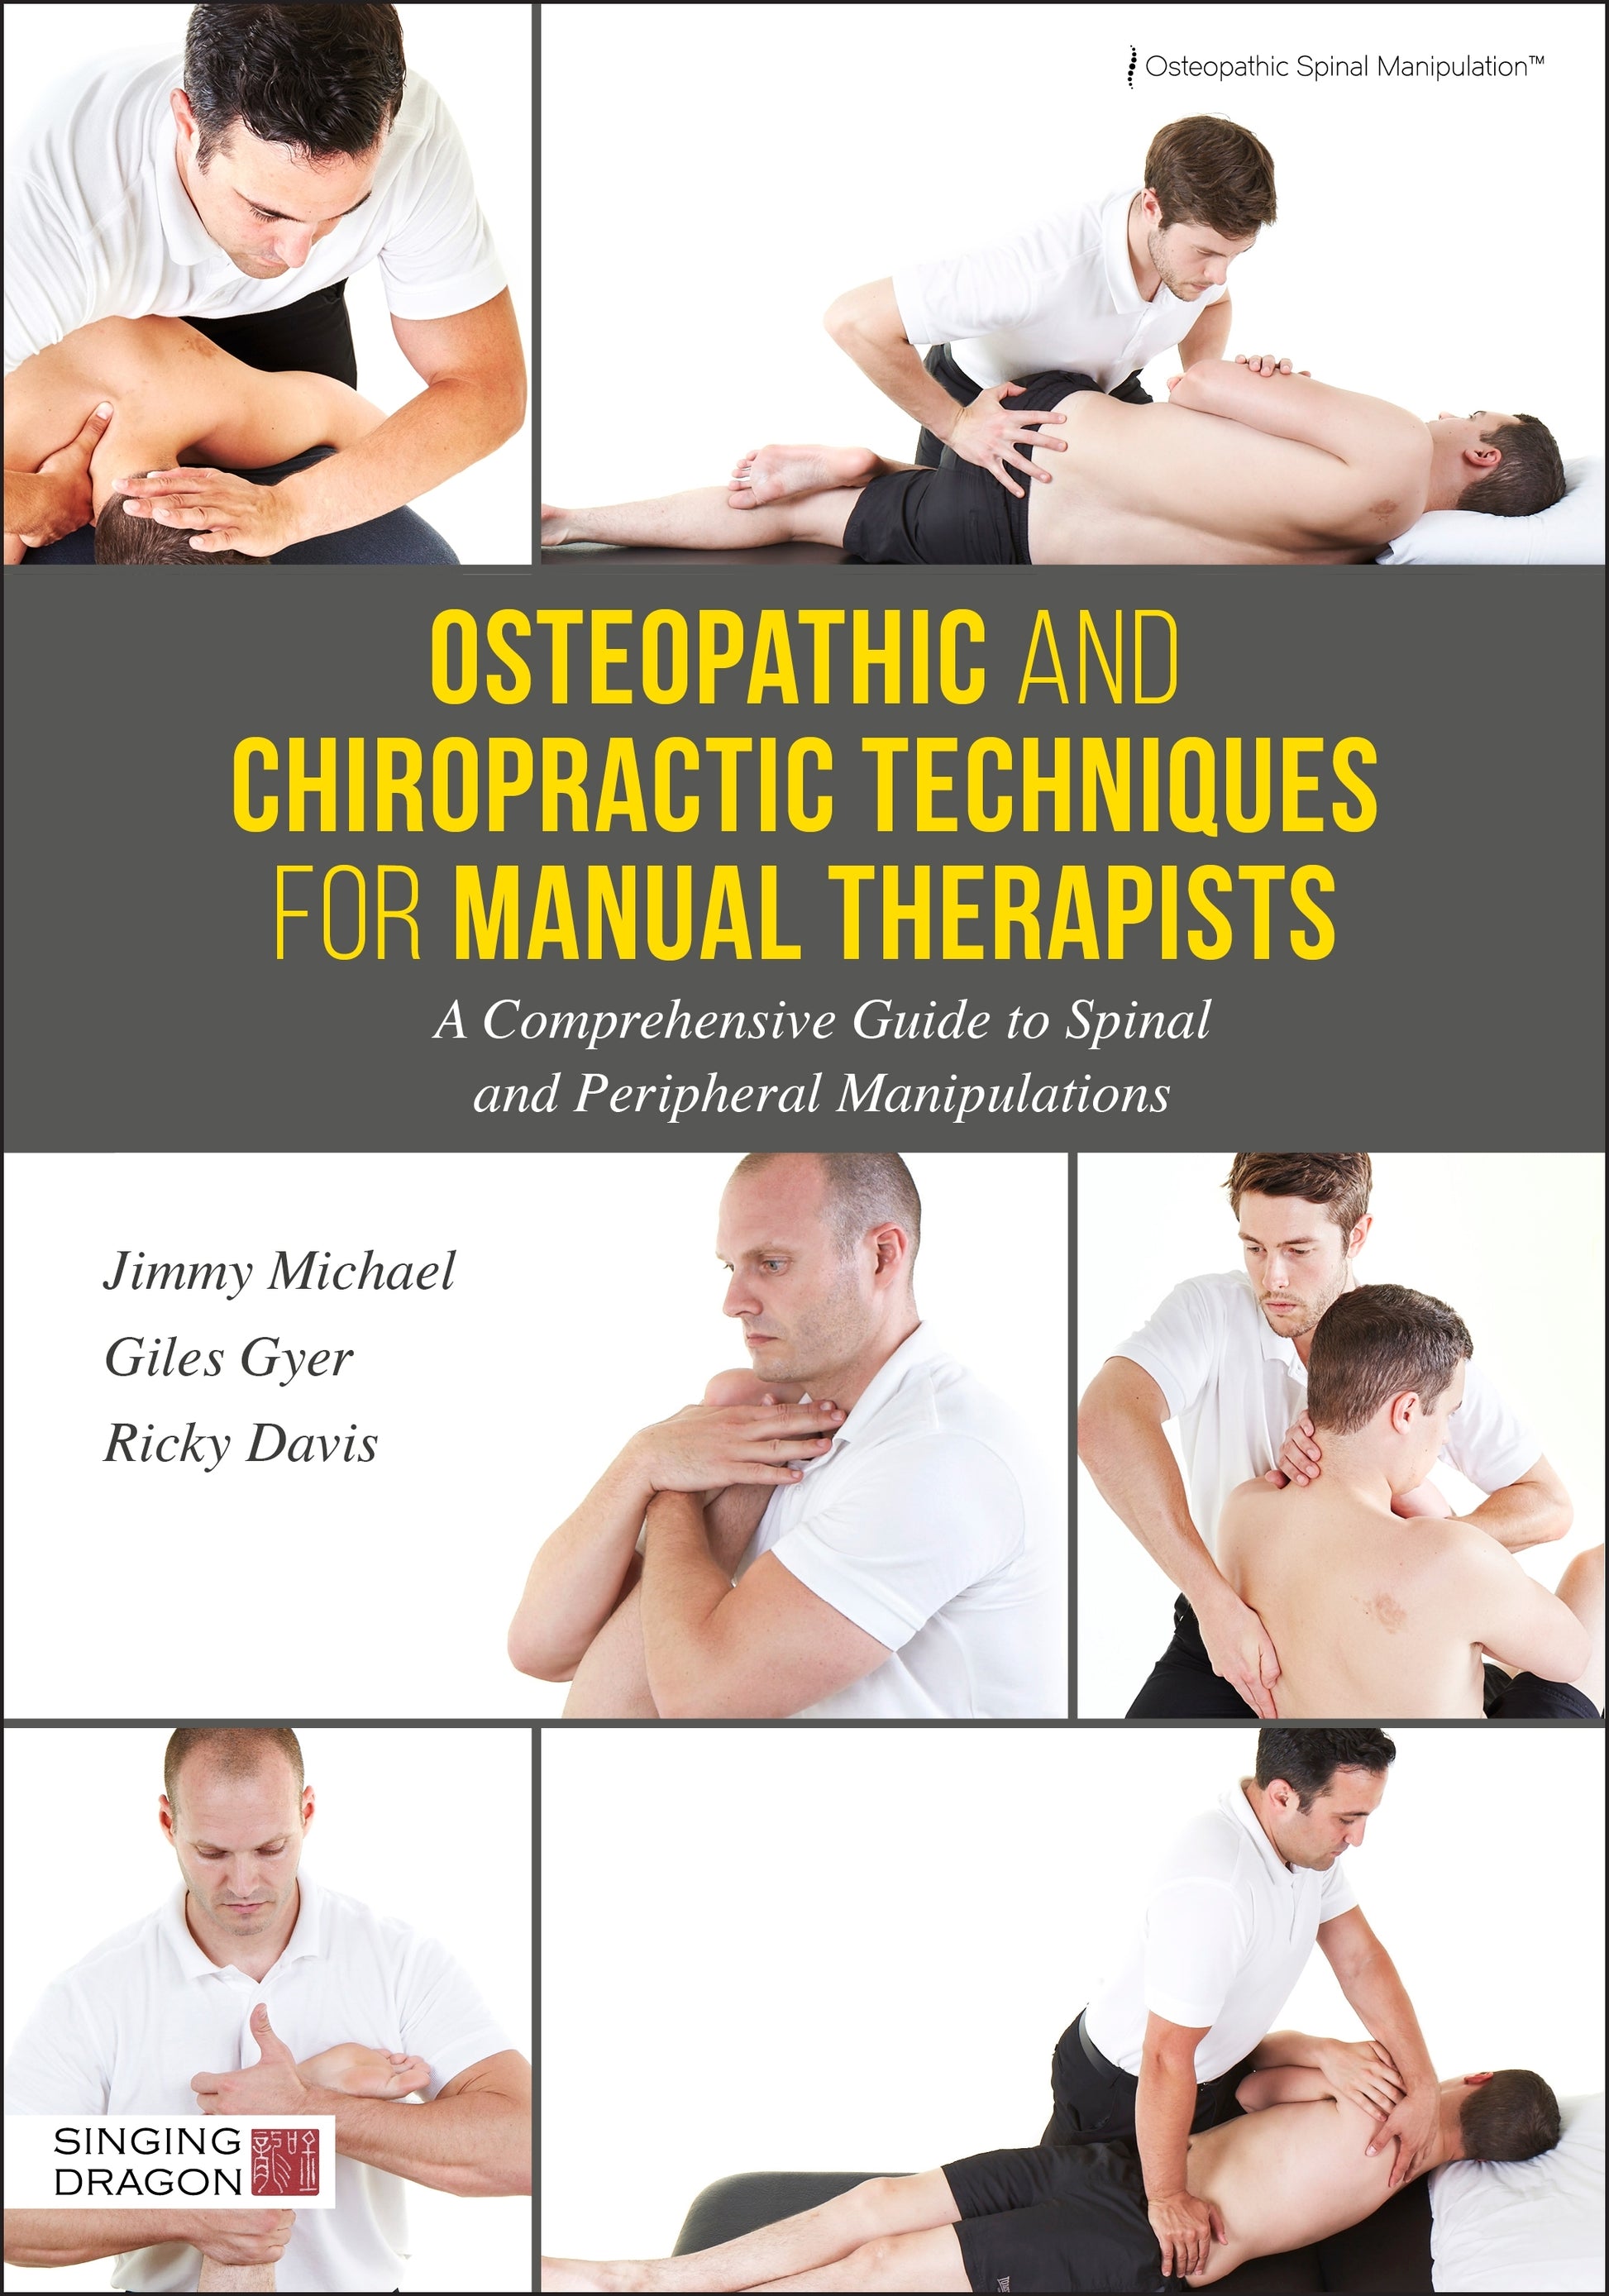 Osteopathic and Chiropractic Techniques for Manual Therapists by Giles Gyer, Jimmy Michael, Ricky Davis